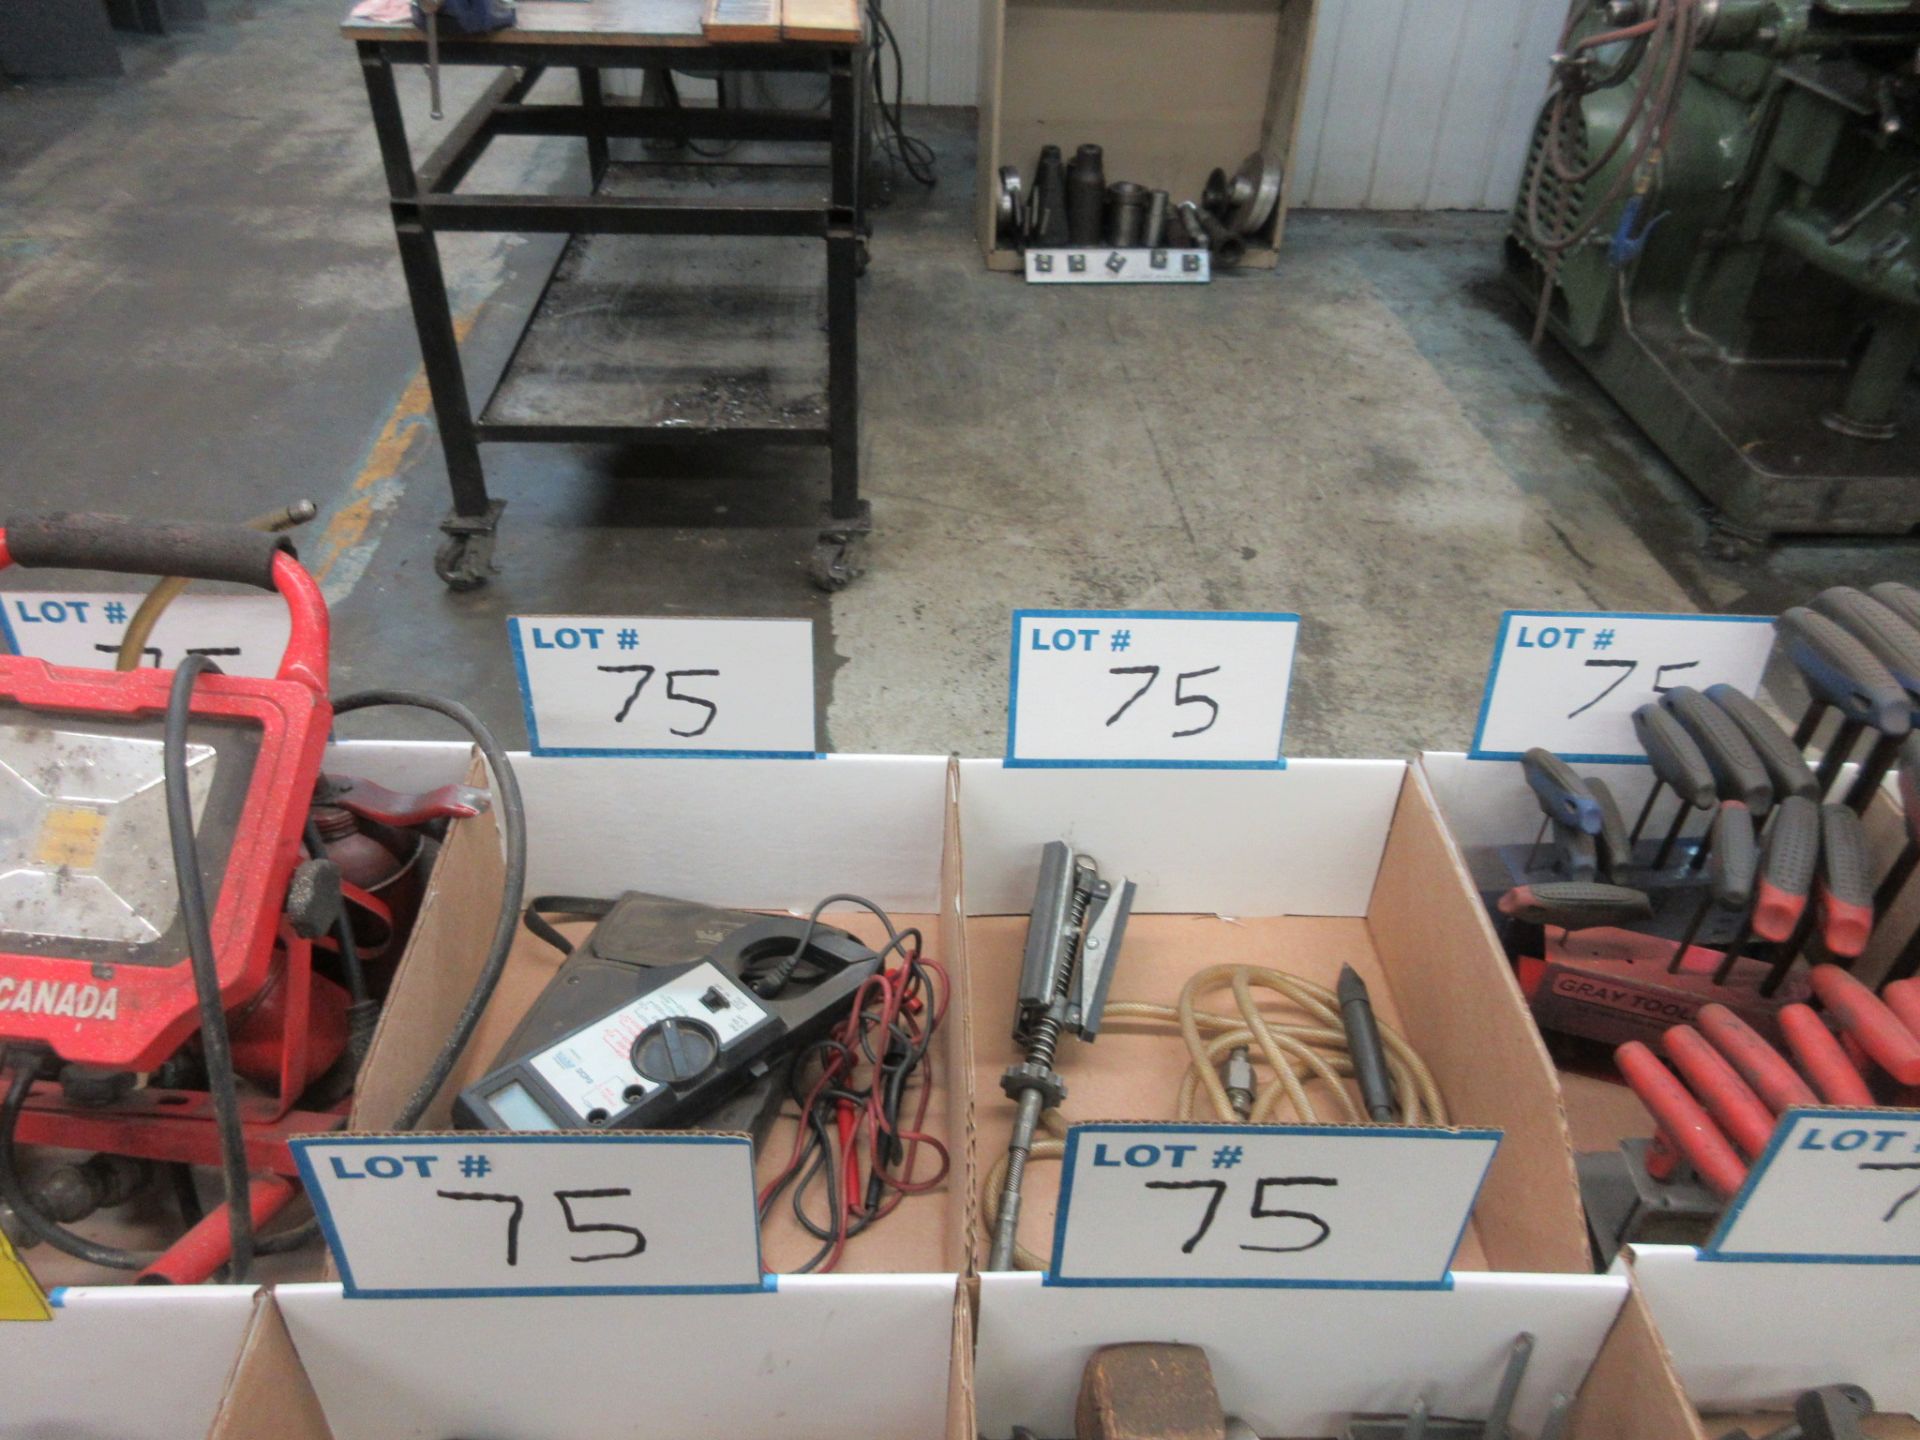 LOT (8) BOXES OF HAND TOOLS, LAMPS, CLAMPS, ELECTRICAL TESTER, PULLER, T-WRENCH SETS, ALLEN KEYS, - Image 3 of 4